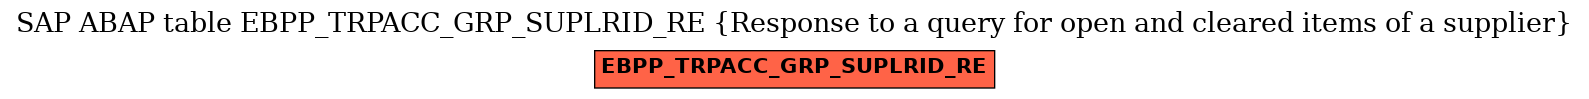 E-R Diagram for table EBPP_TRPACC_GRP_SUPLRID_RE (Response to a query for open and cleared items of a supplier)